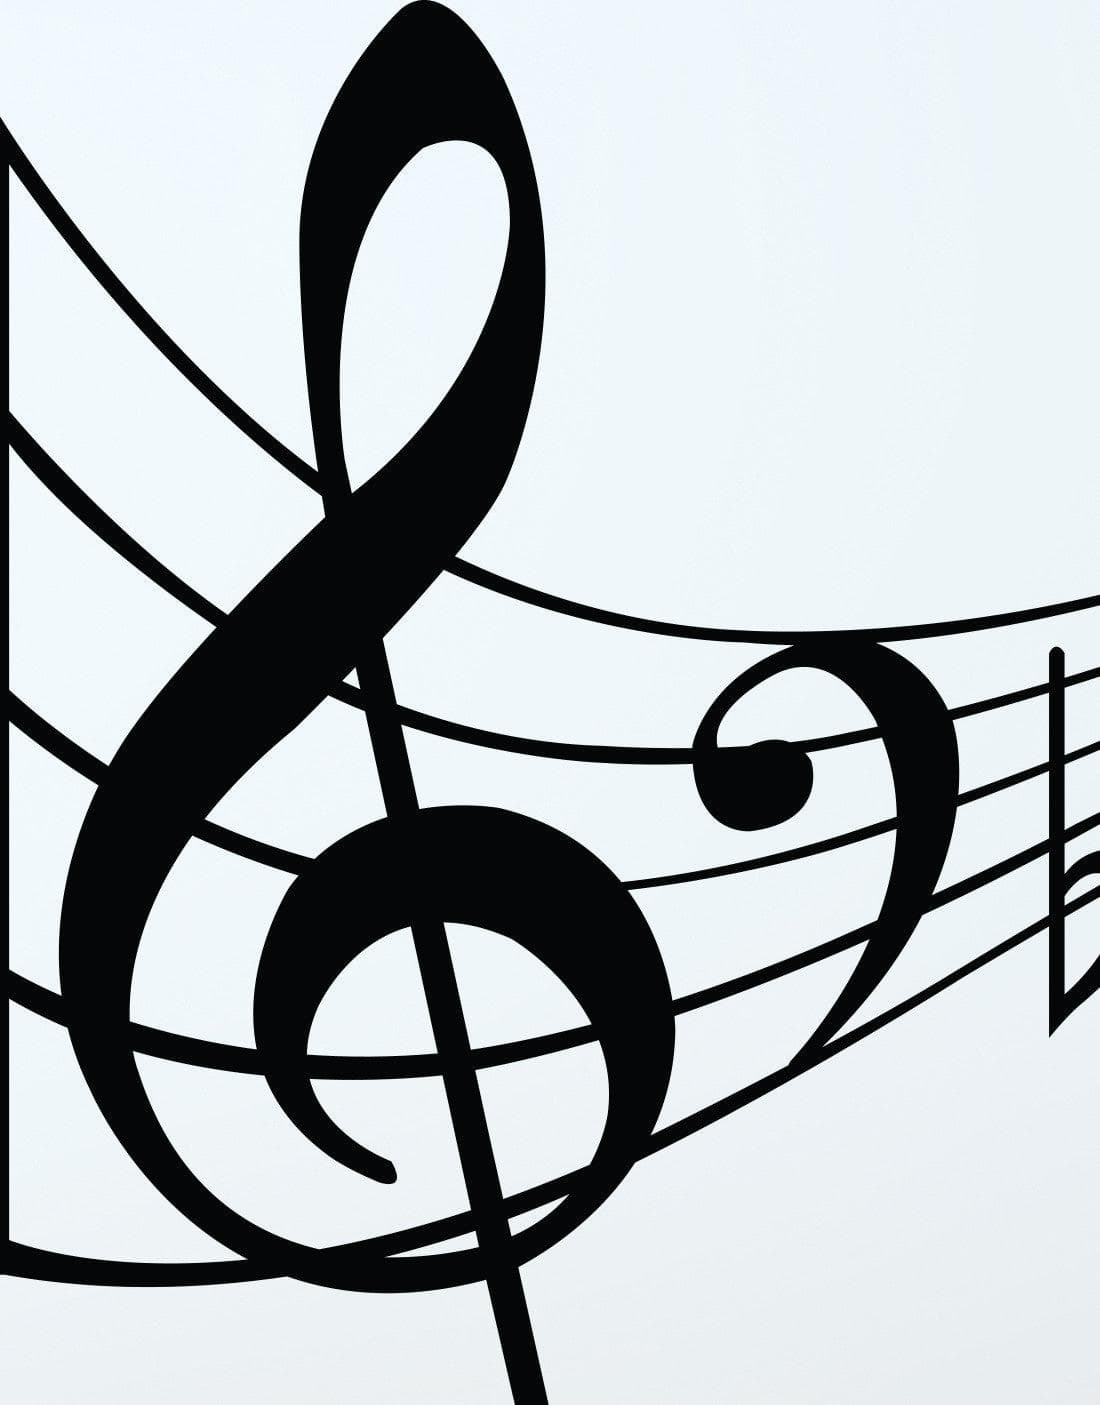 Music Notes Vinyl Wall Decal Sticker. #KRiley125